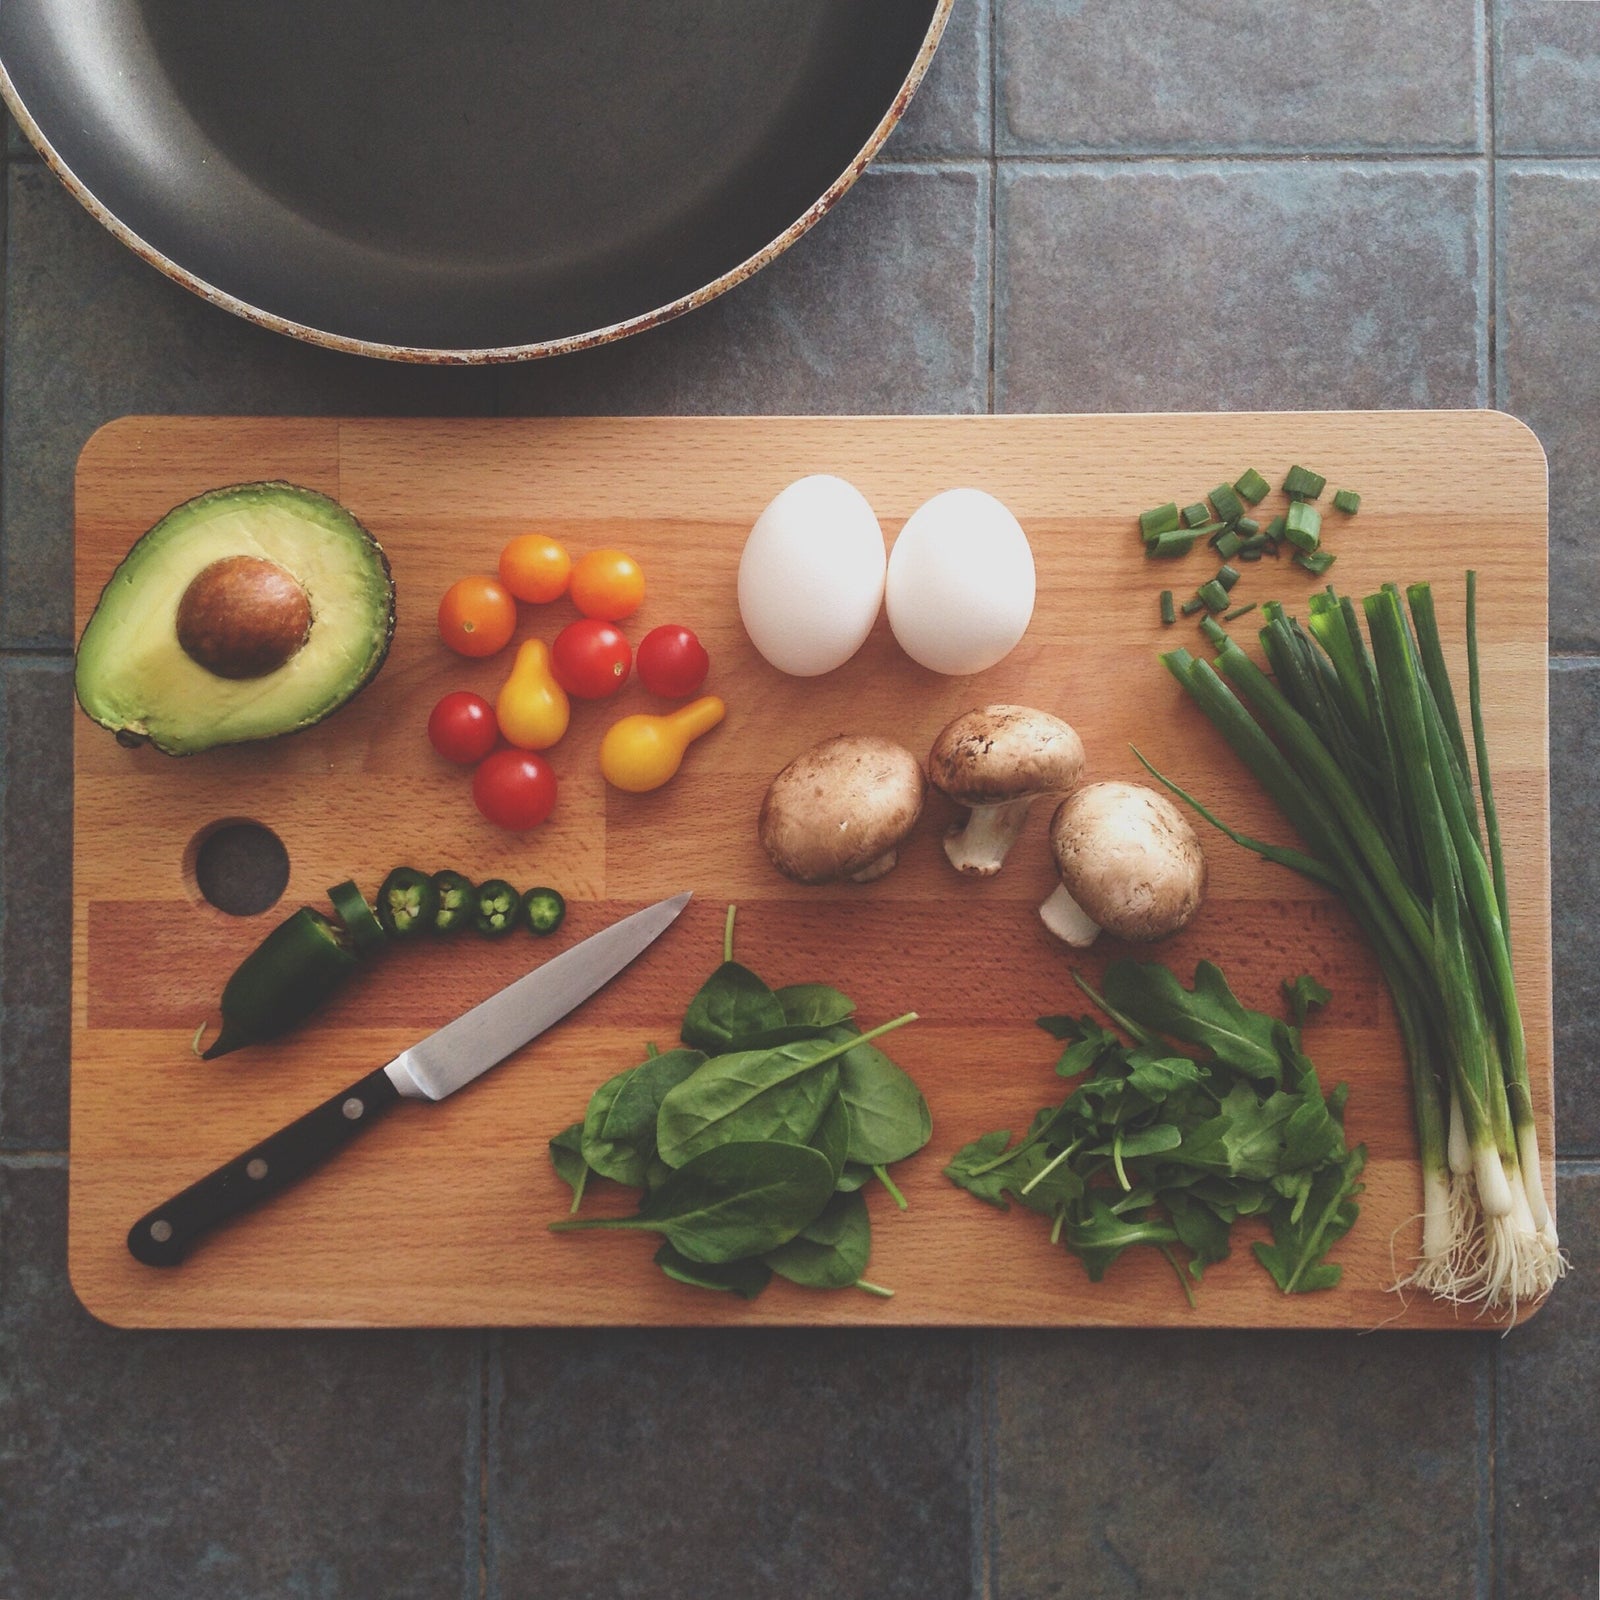 a photo of fruits and vegetables on a wooden cutting board